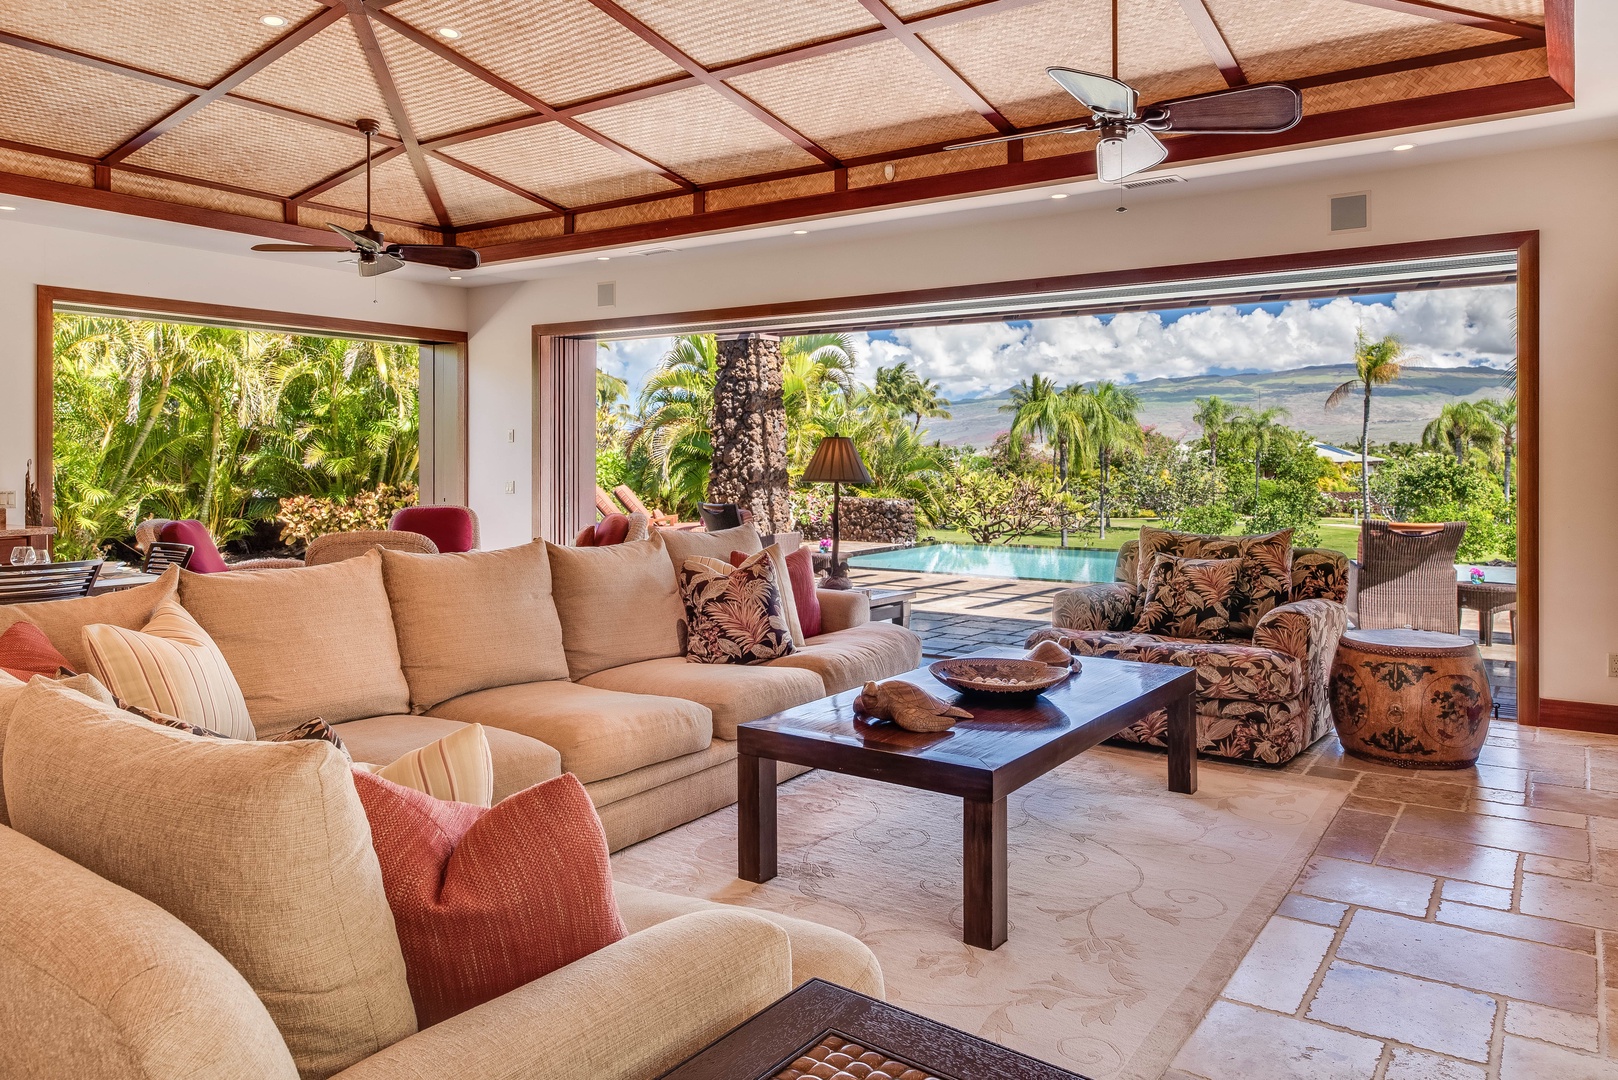 Kamuela Vacation Rentals, House of the Turtle at Champion Ridge, Mauna Lani (CR 18) - Plush Seating and Spectacular Mountain Views